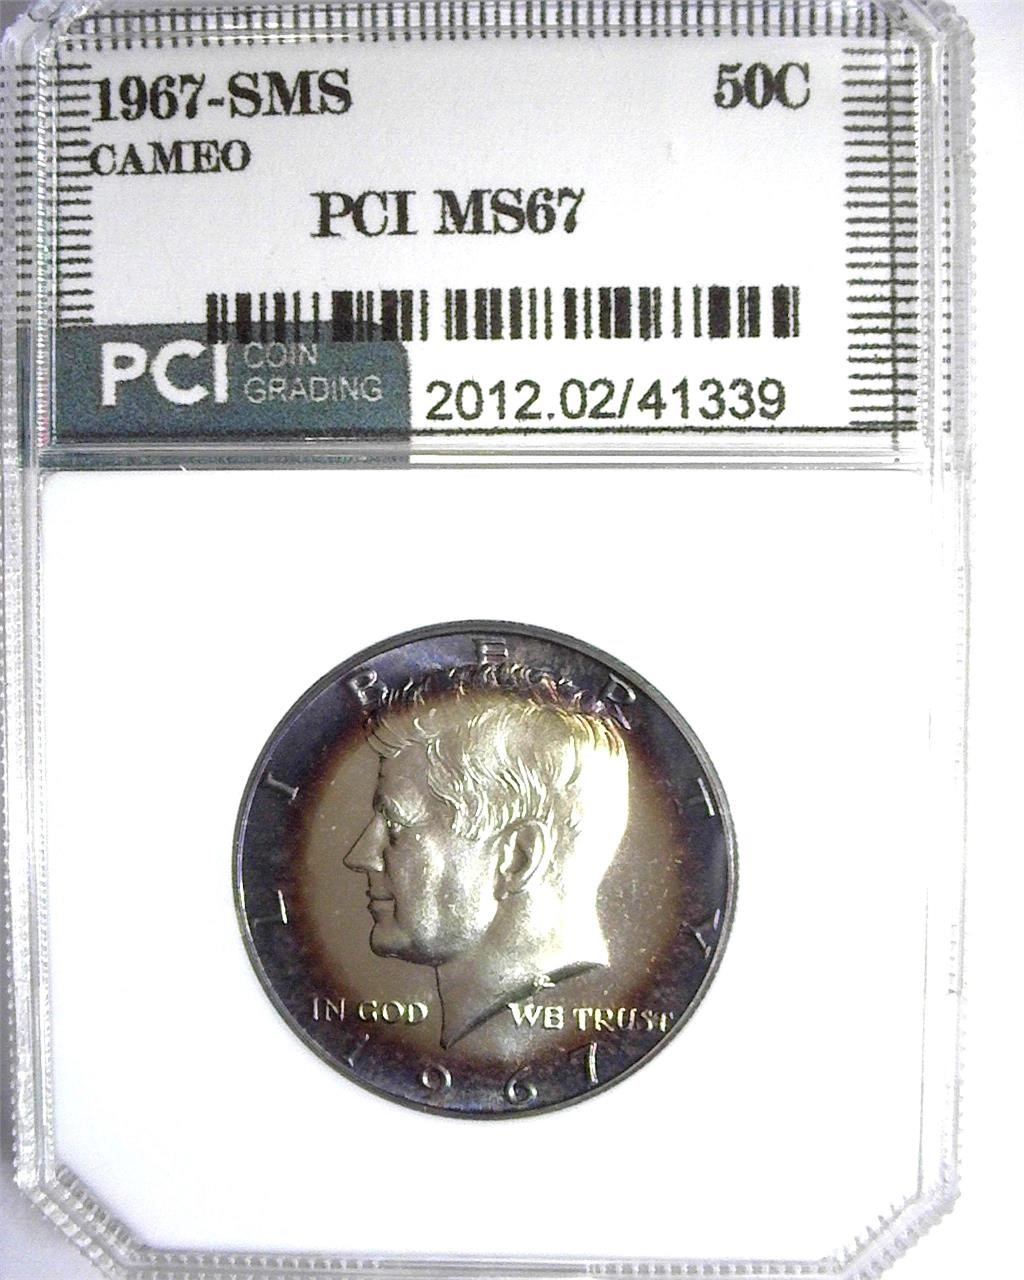 1967 SMS Kennedy PCI MS67 CAM BOLD COLOR